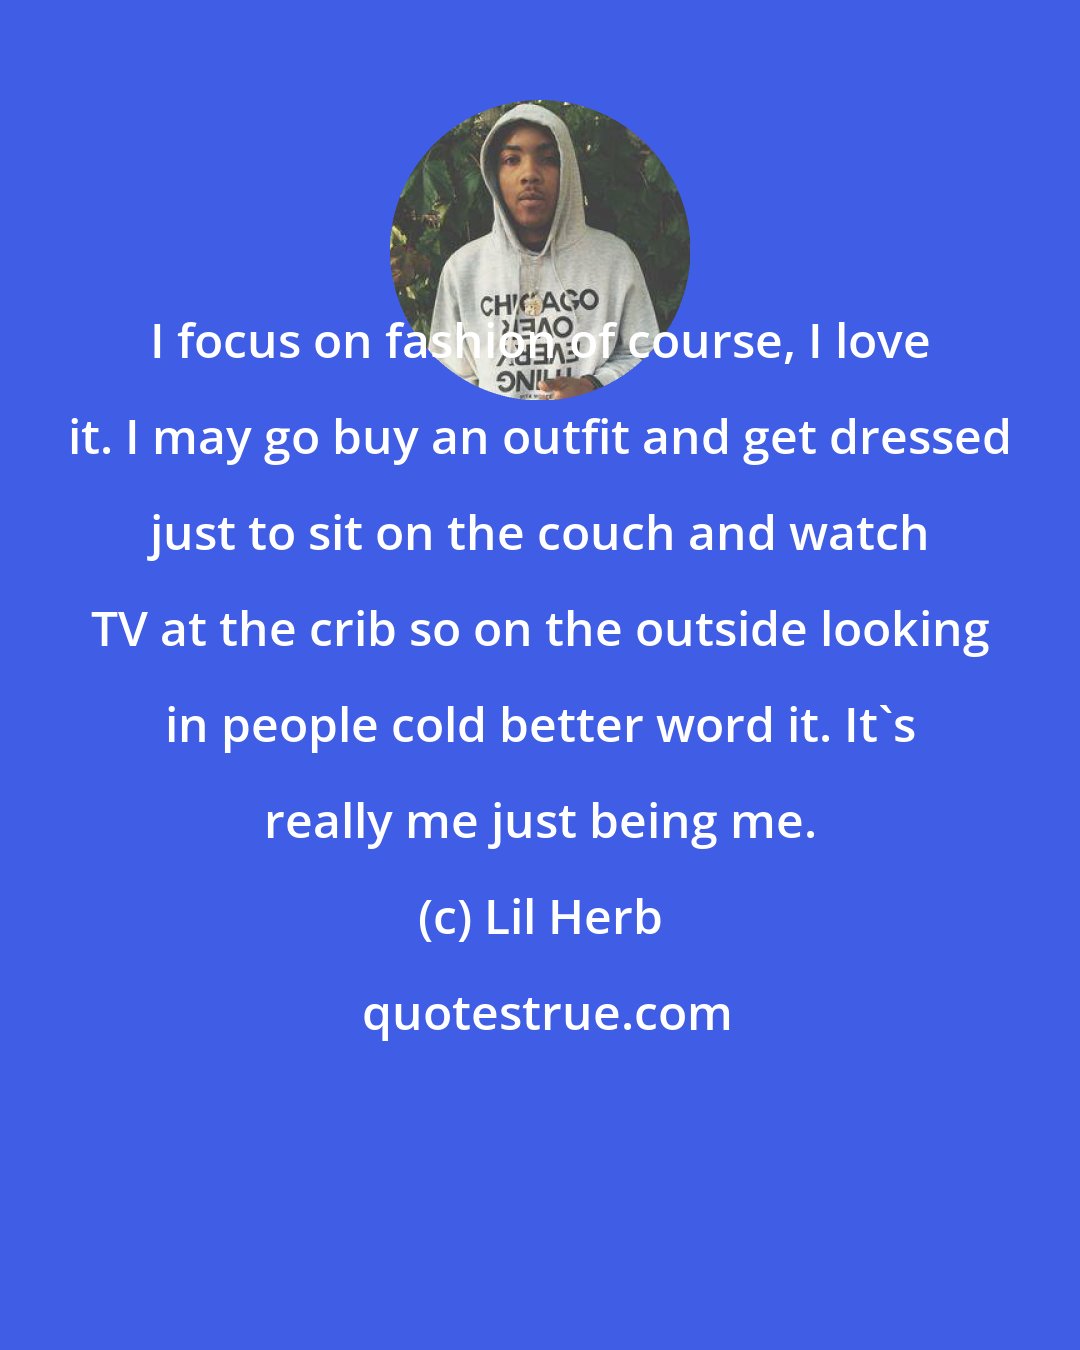 Lil Herb: I focus on fashion of course, I love it. I may go buy an outfit and get dressed just to sit on the couch and watch TV at the crib so on the outside looking in people cold better word it. It's really me just being me.